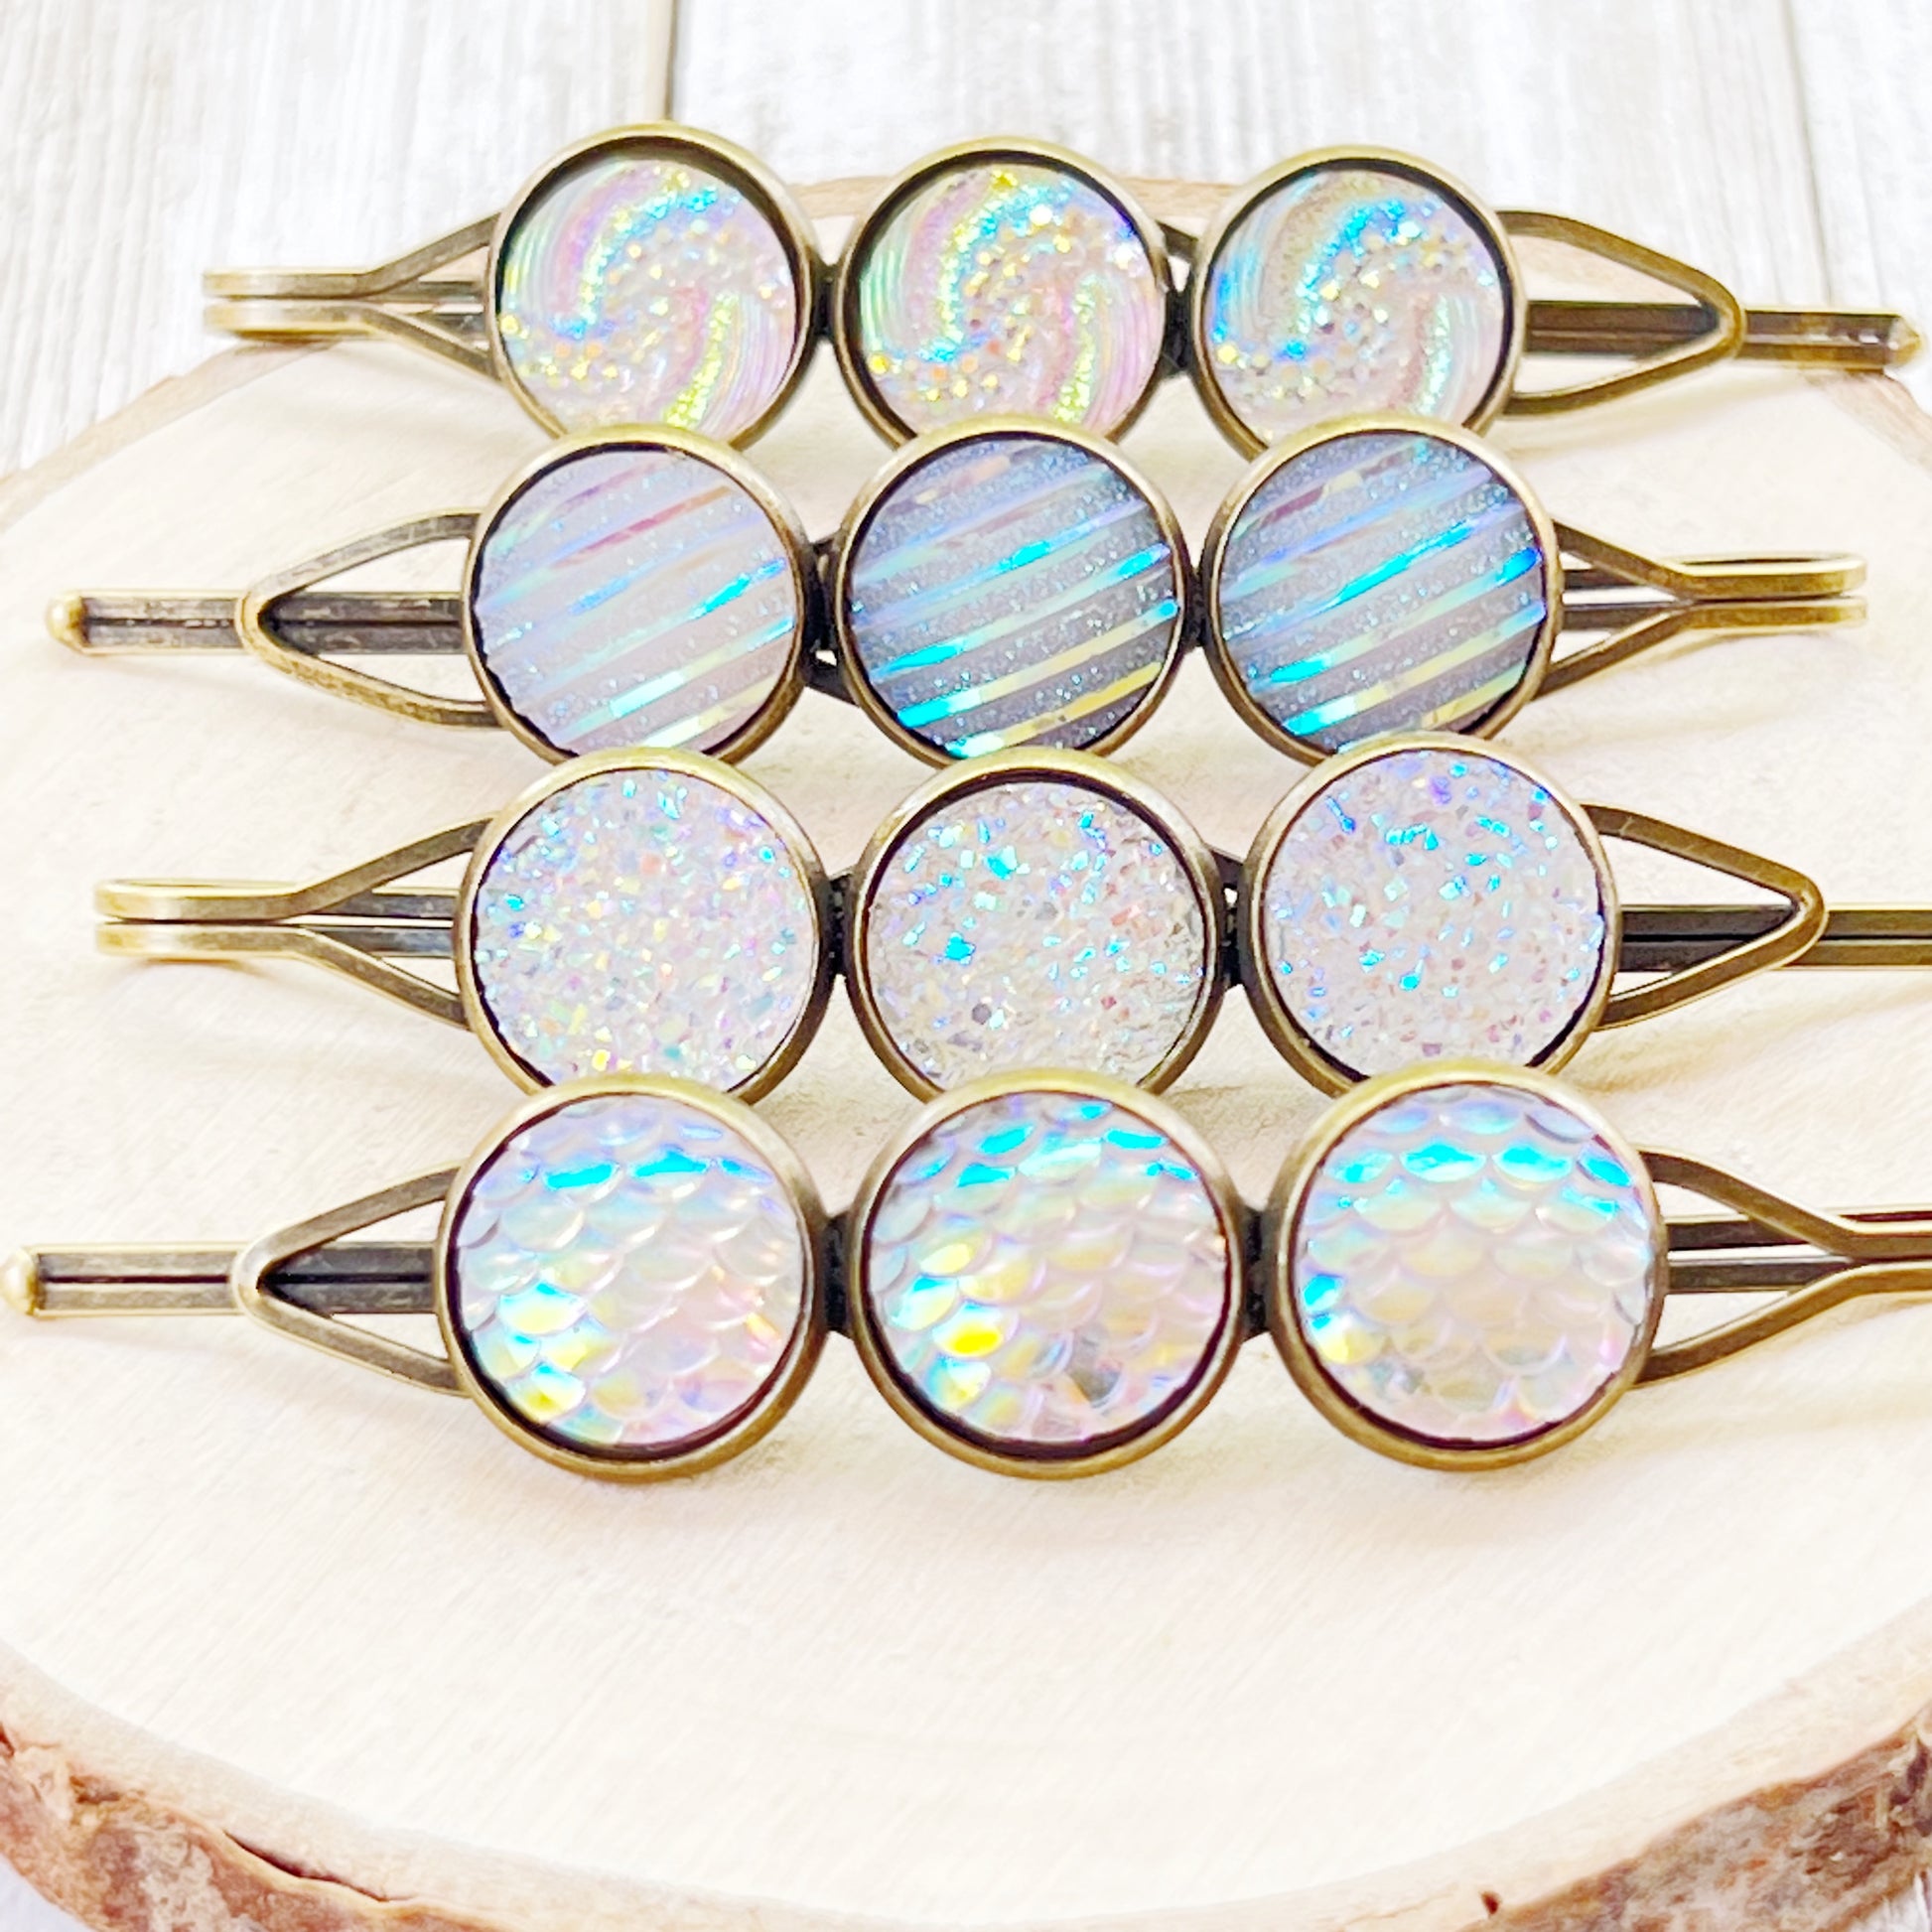 White Glitter Druzy Hair Pins: Set of 4 Stylish Accessories with Unique Patterns